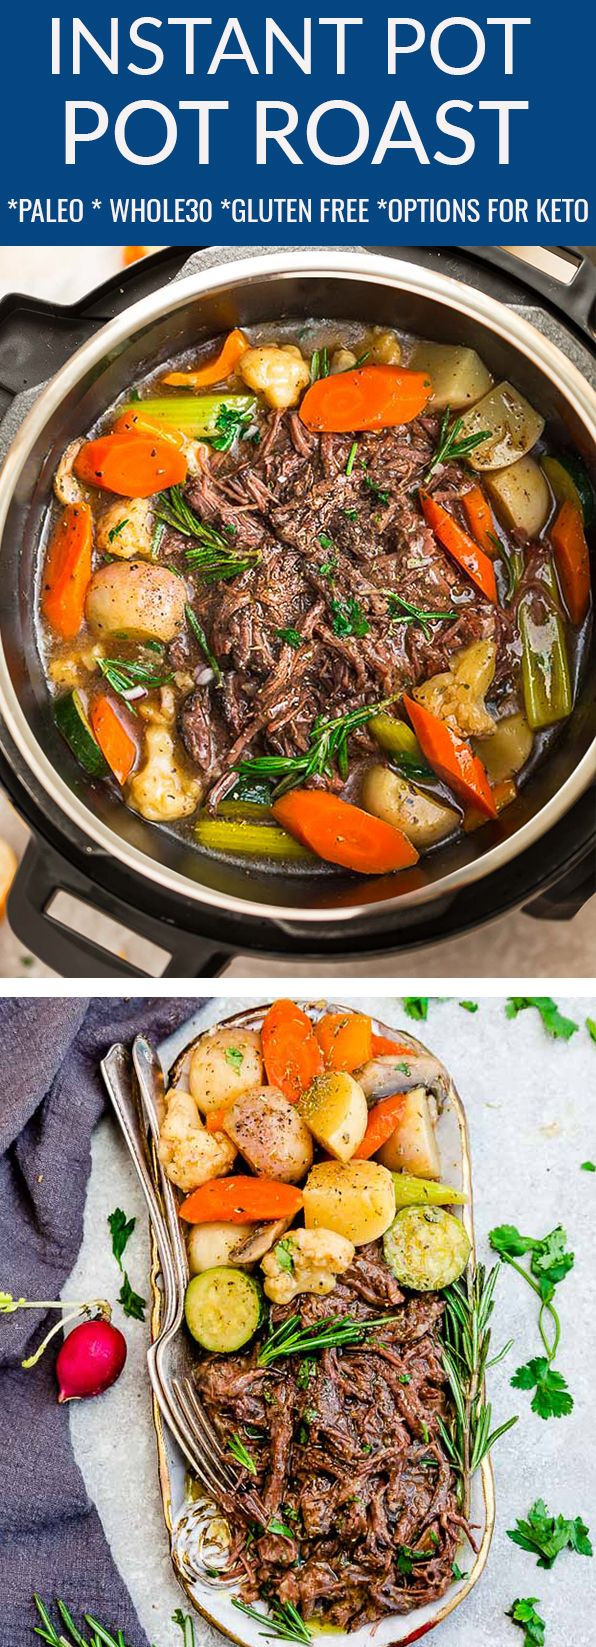 Instant Pot Gourmet Recipes
 Instant Pot Pot Roast recipe is hearty flavorful and easy